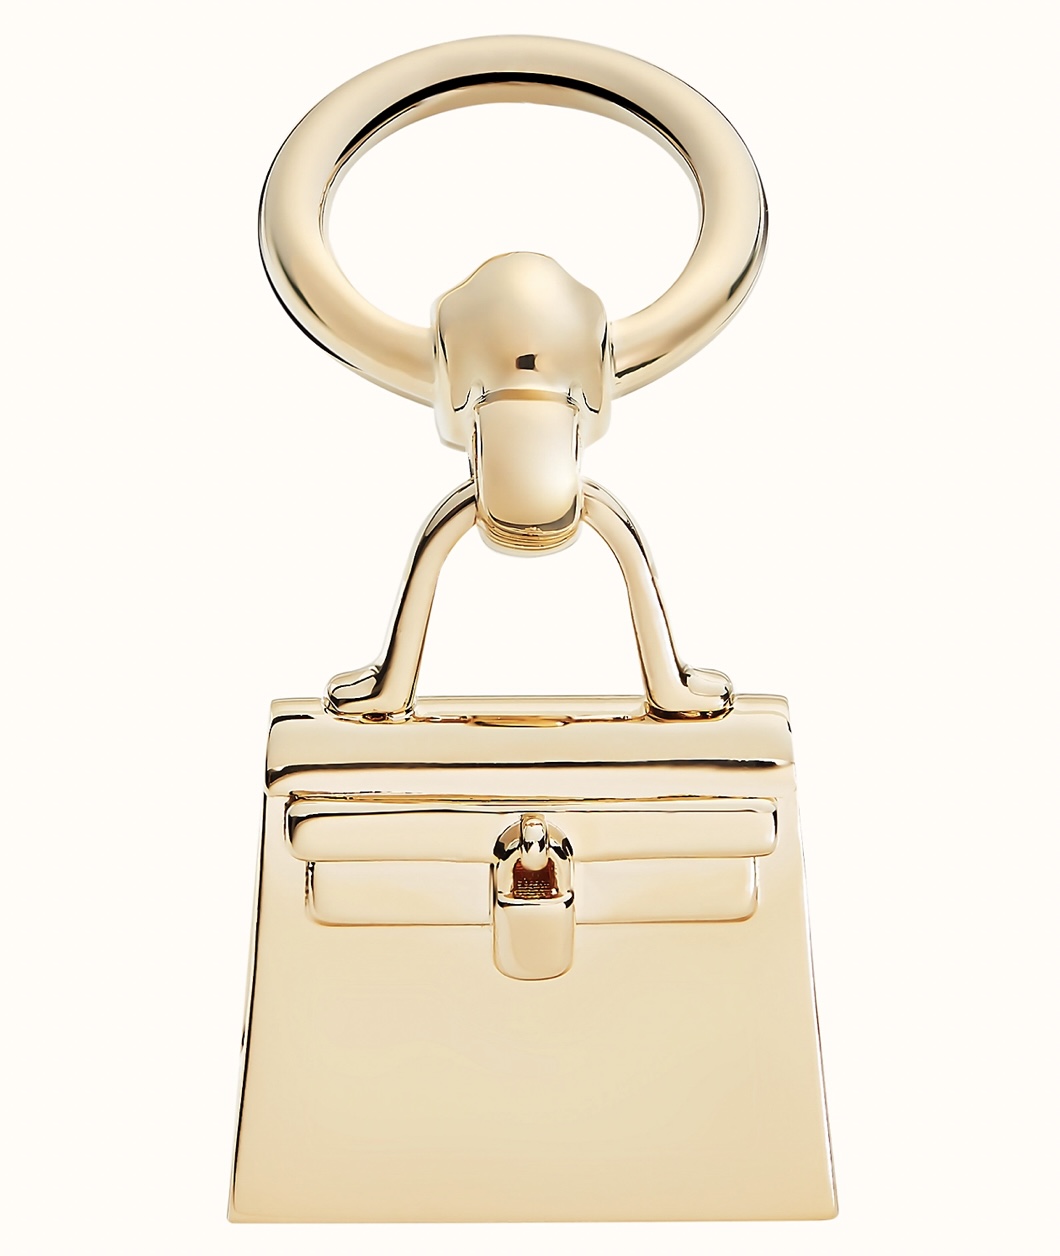 Holiday Gift Guide: Hermès Bags for Men, Handbags and Accessories